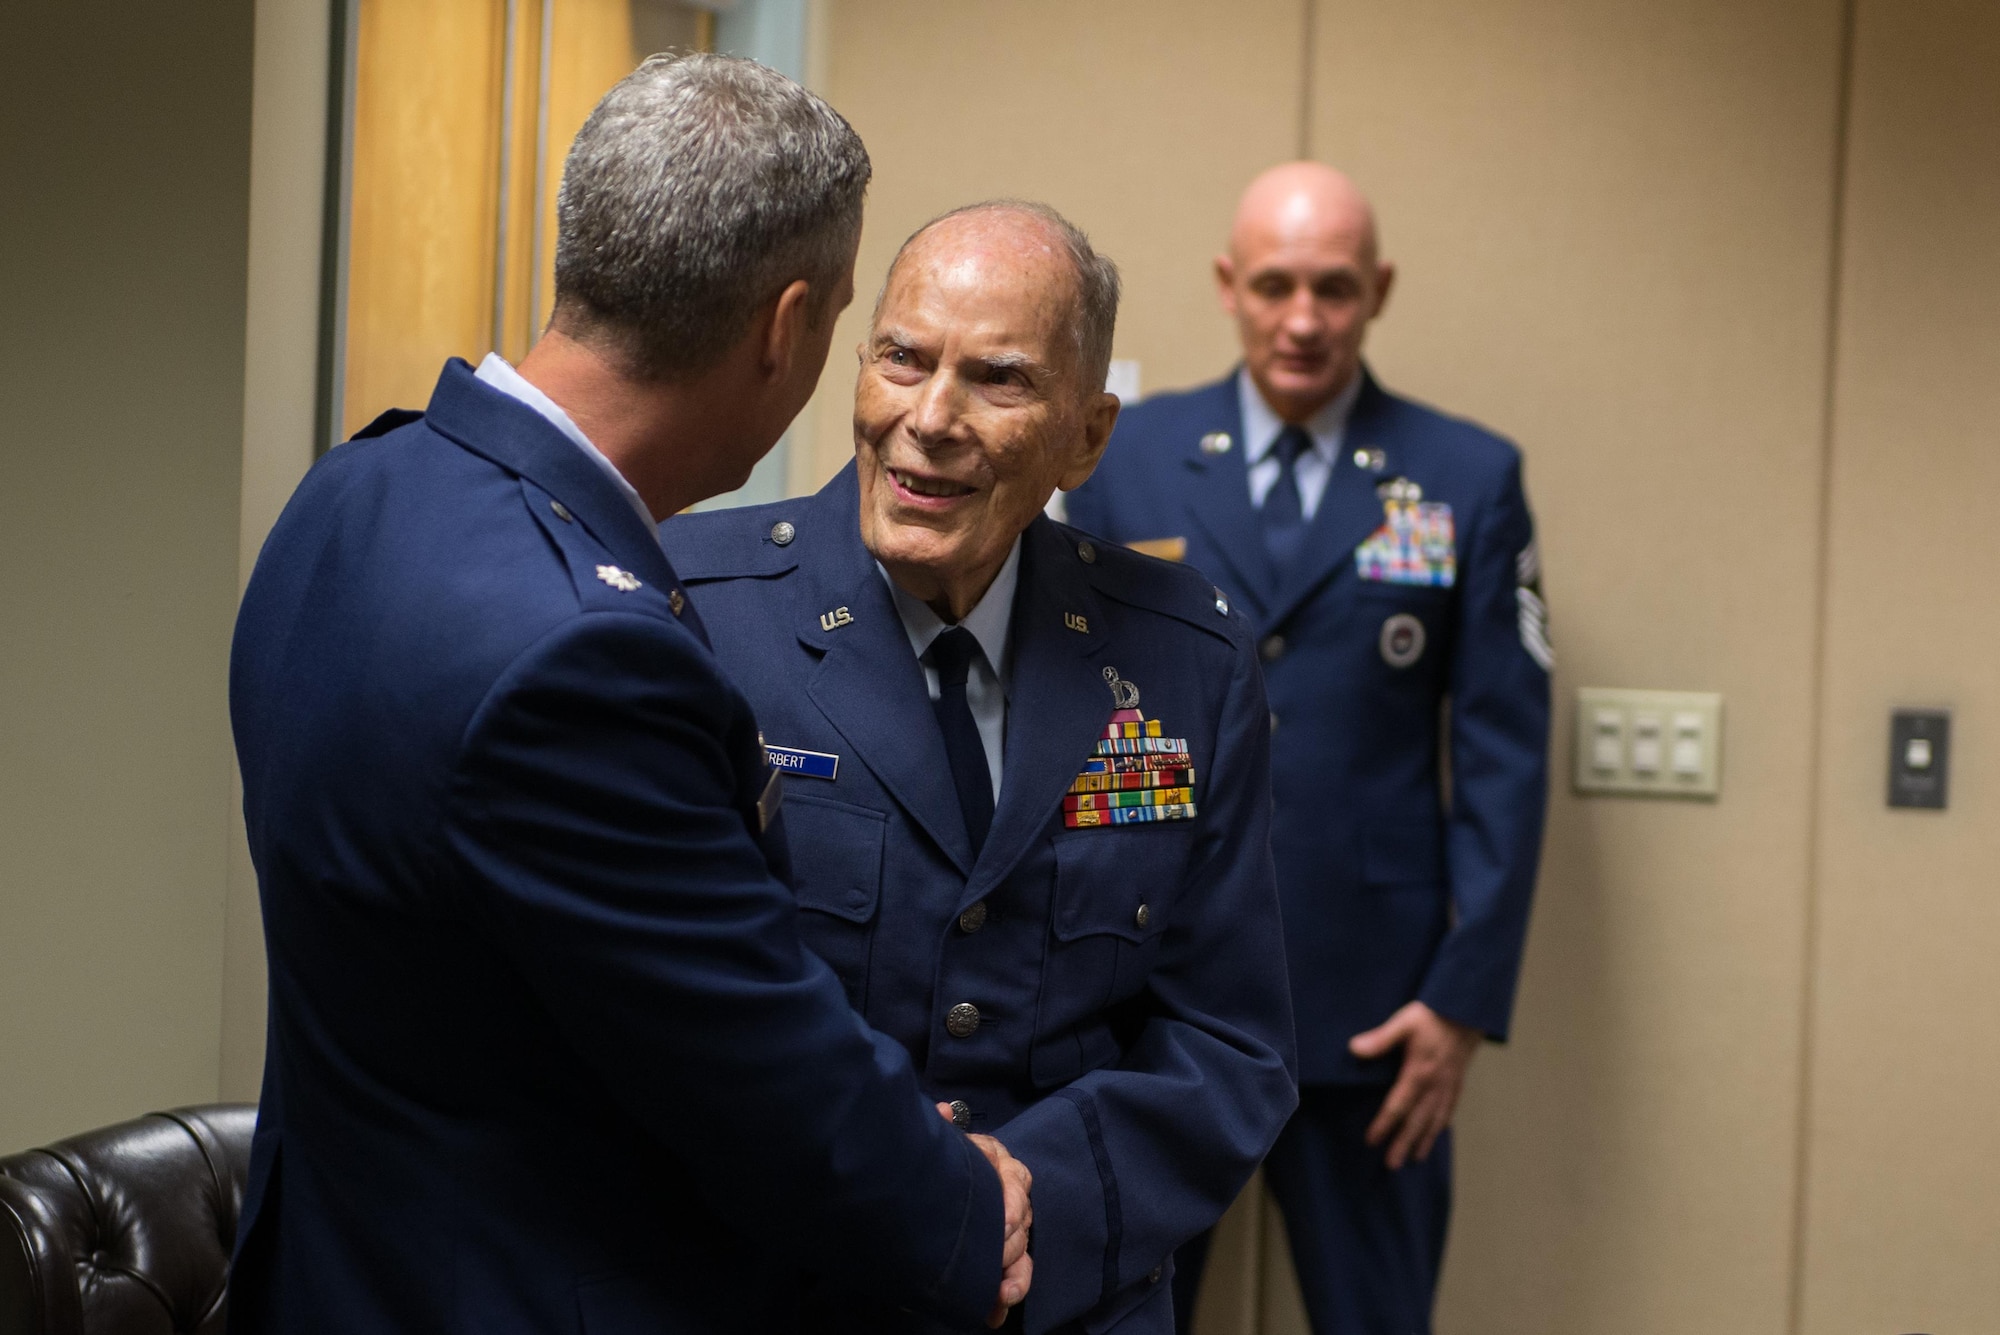 Retired Chief Warrant Officer 4 Francis Herbert is welcomed by Lt. Col. Steven Mullins, 334th Training Squadron commander, during a room dedication ceremony in Cody Hall April 26, 2016, Keesler Air Force Base, Miss. The room was dedicated to Herbert for his 50 years of service in air traffic control in the Army, Army Air Corps, and Air Force from 1942-1972, then as a Keesler civilian instructor for 20 years. (U.S. Air Force photo by Marie Floyd)